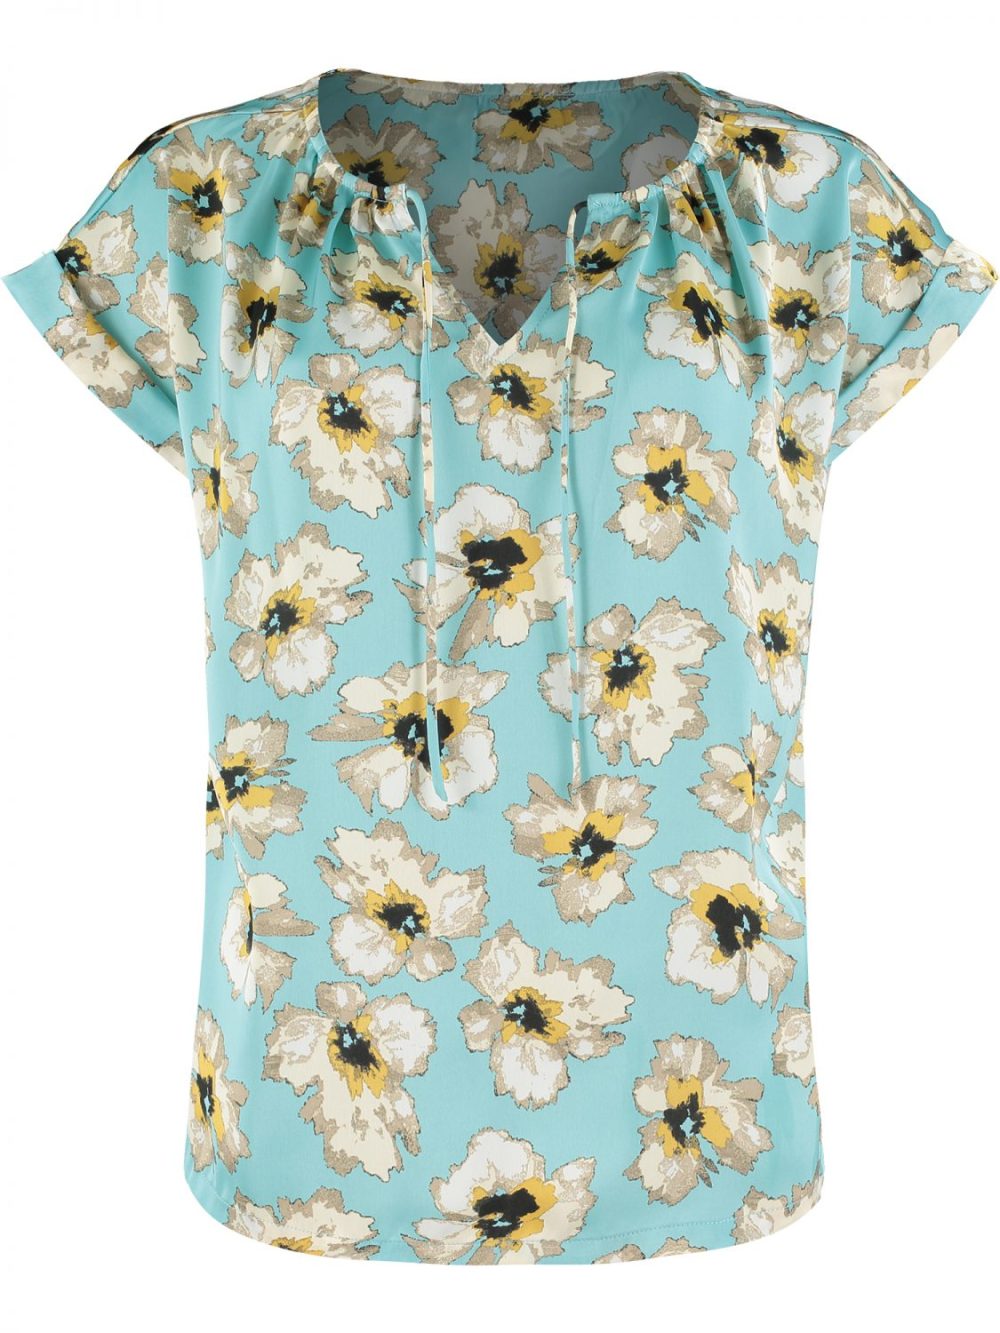 Turquoise Floral Top F